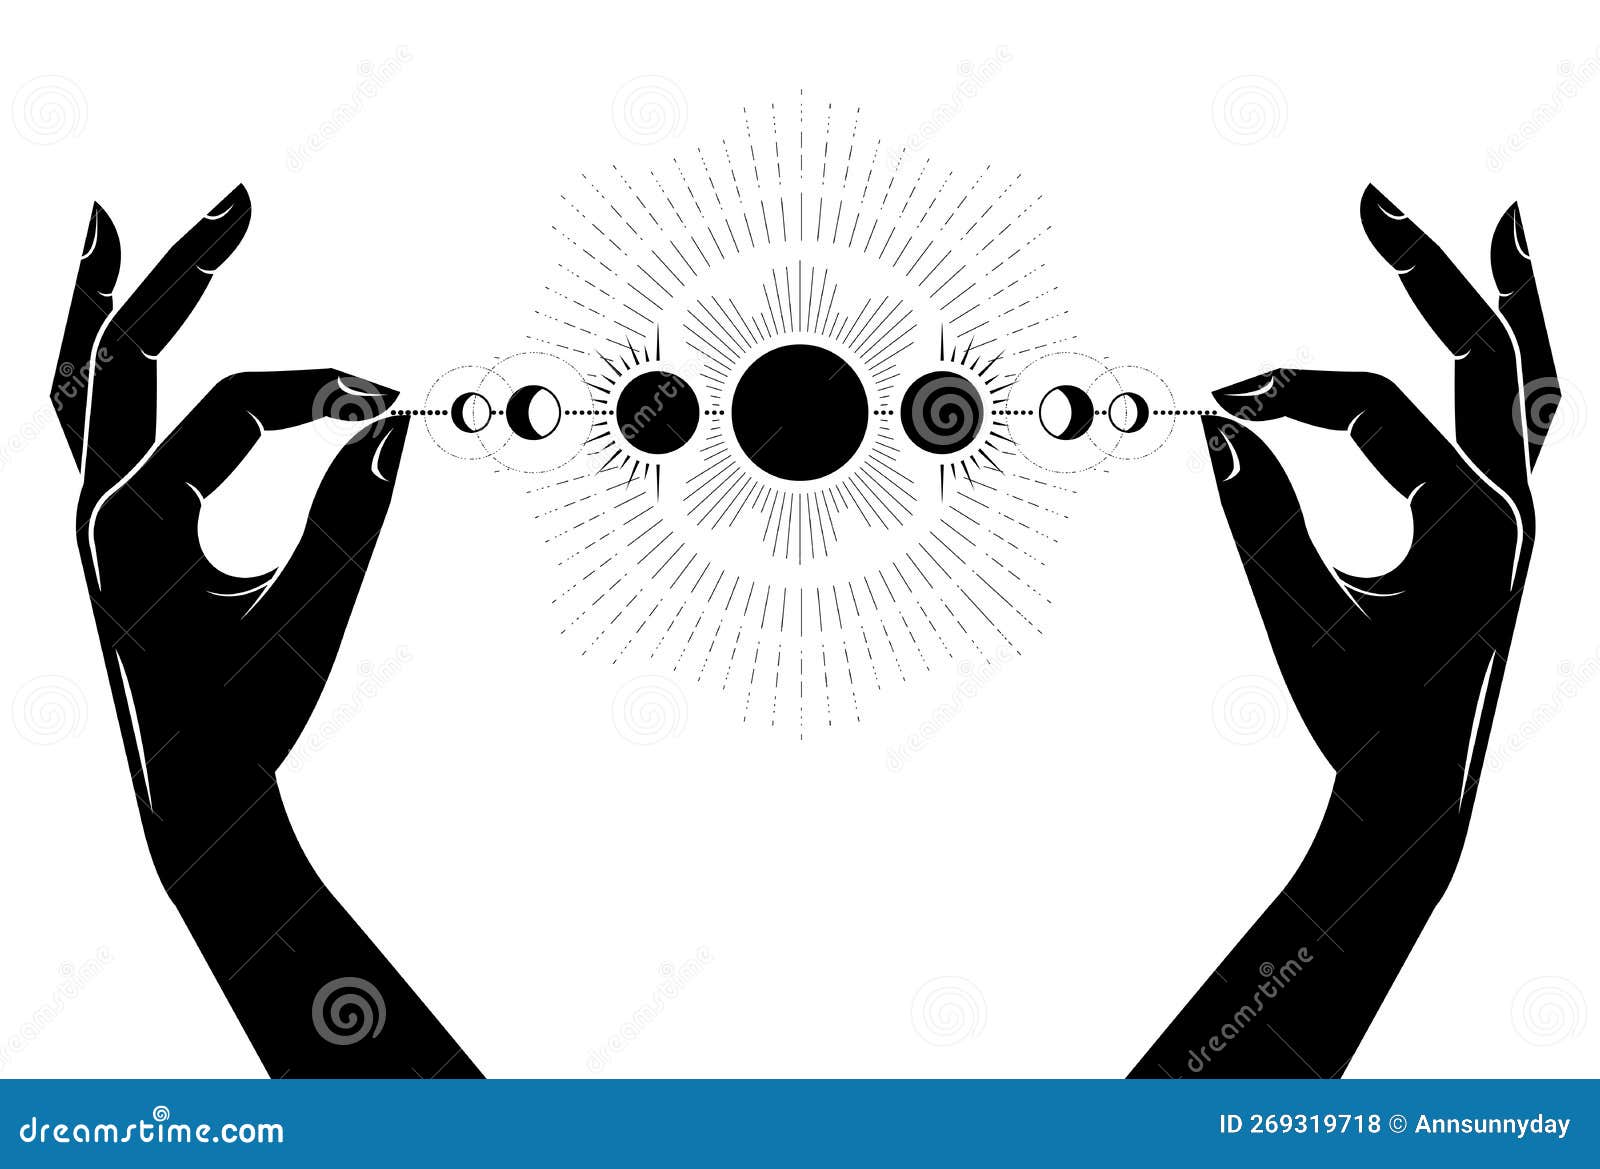 hands with necklace of lunar phases, moon fortunetelling, horoscope and astrology, mystic wizardry